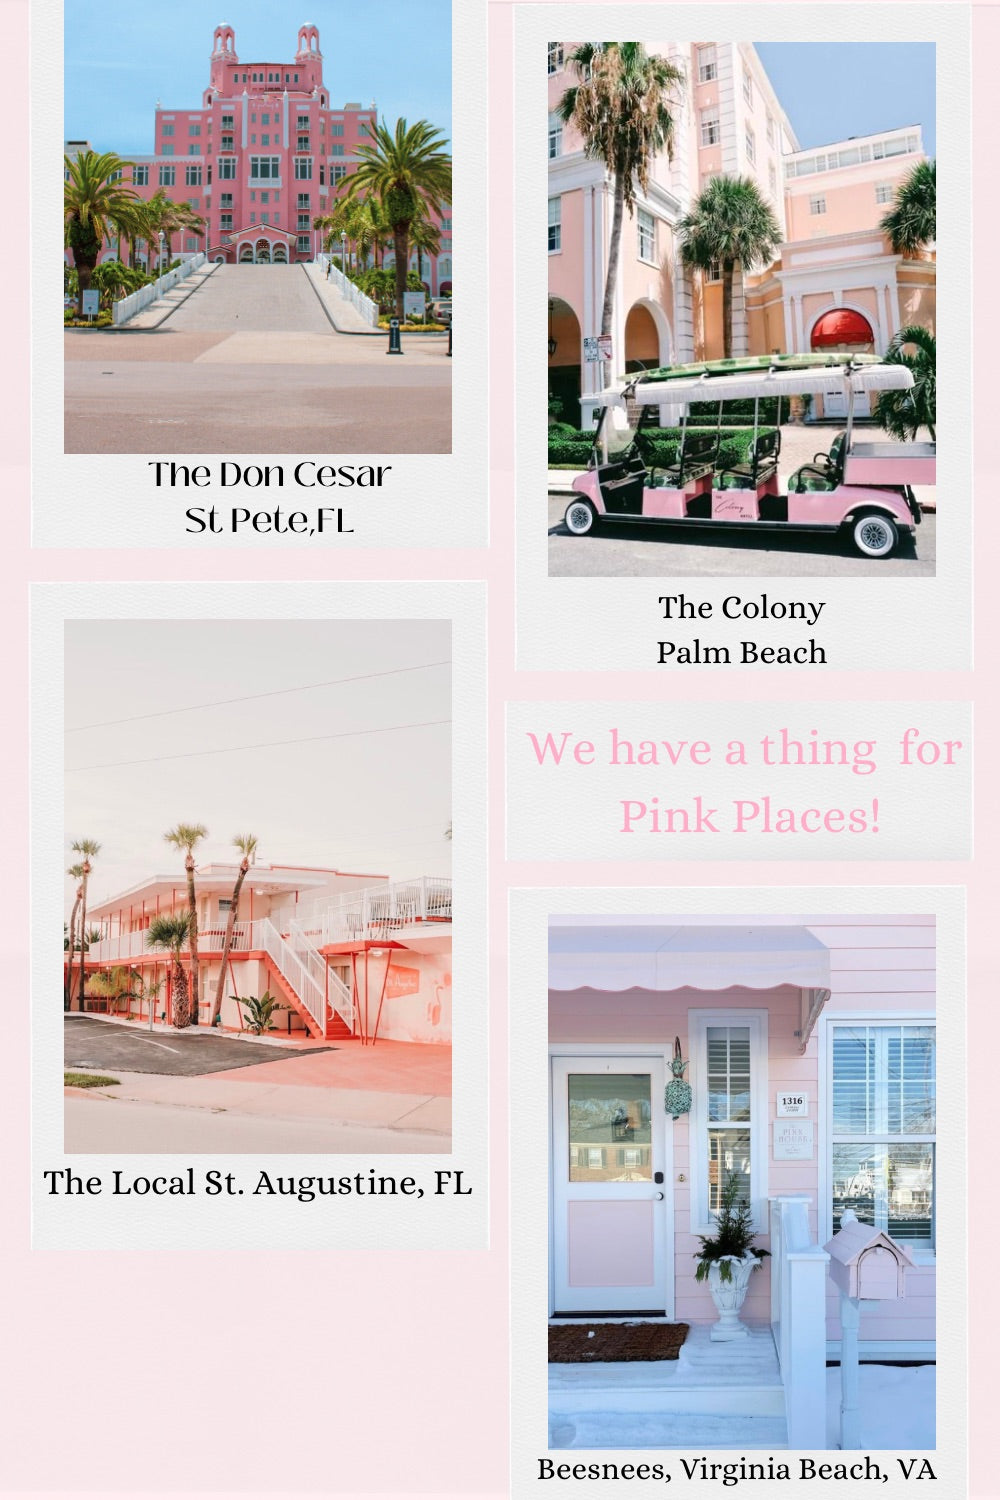 Pink Hotels and Airbnb’s